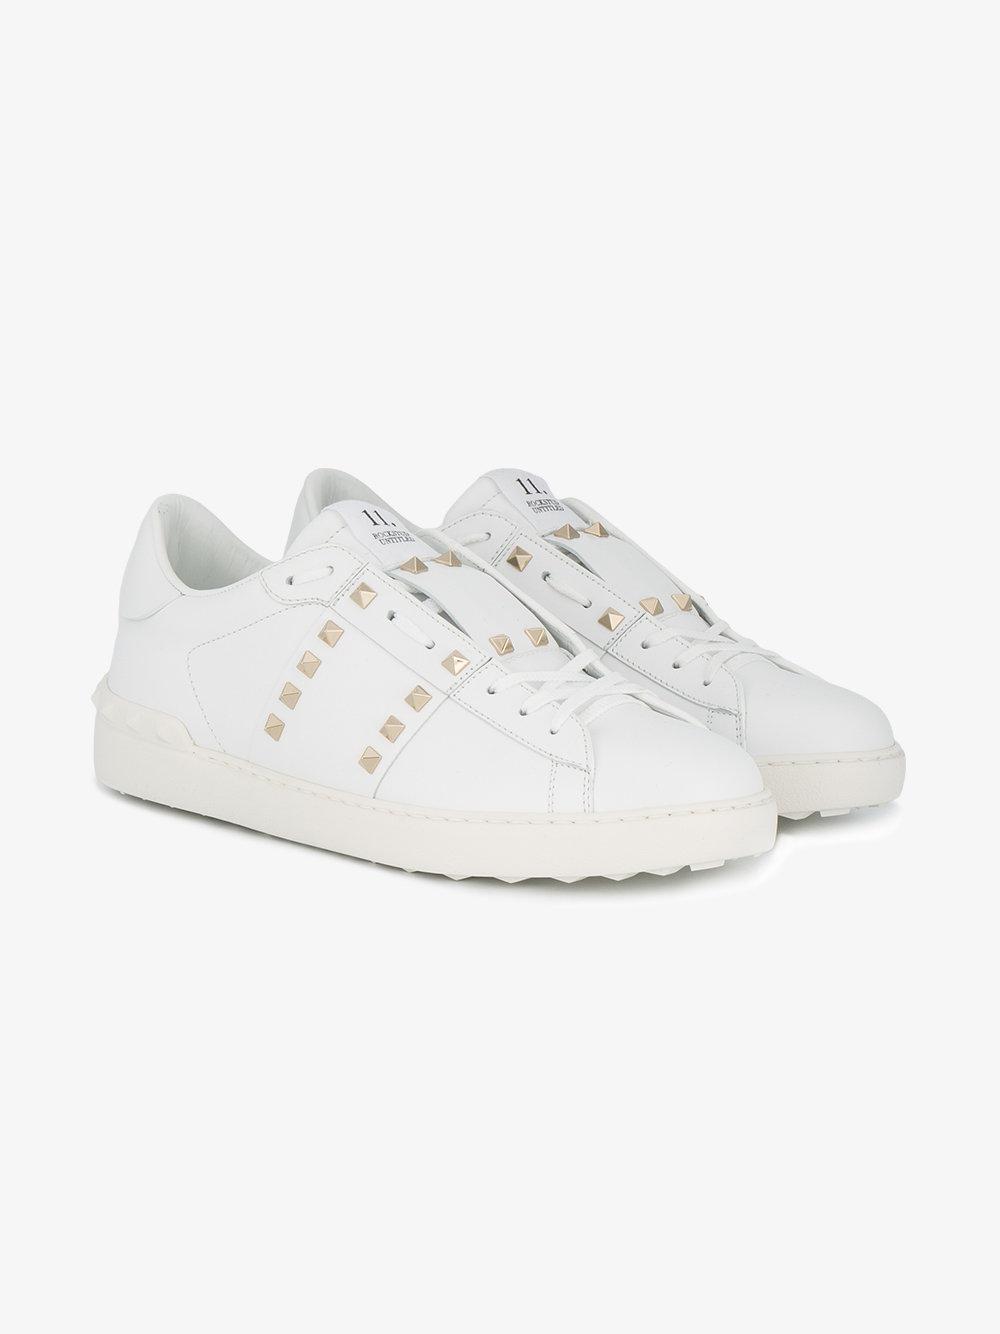 Valentino Rockstud Untitled Sneakers in White for Men - Lyst